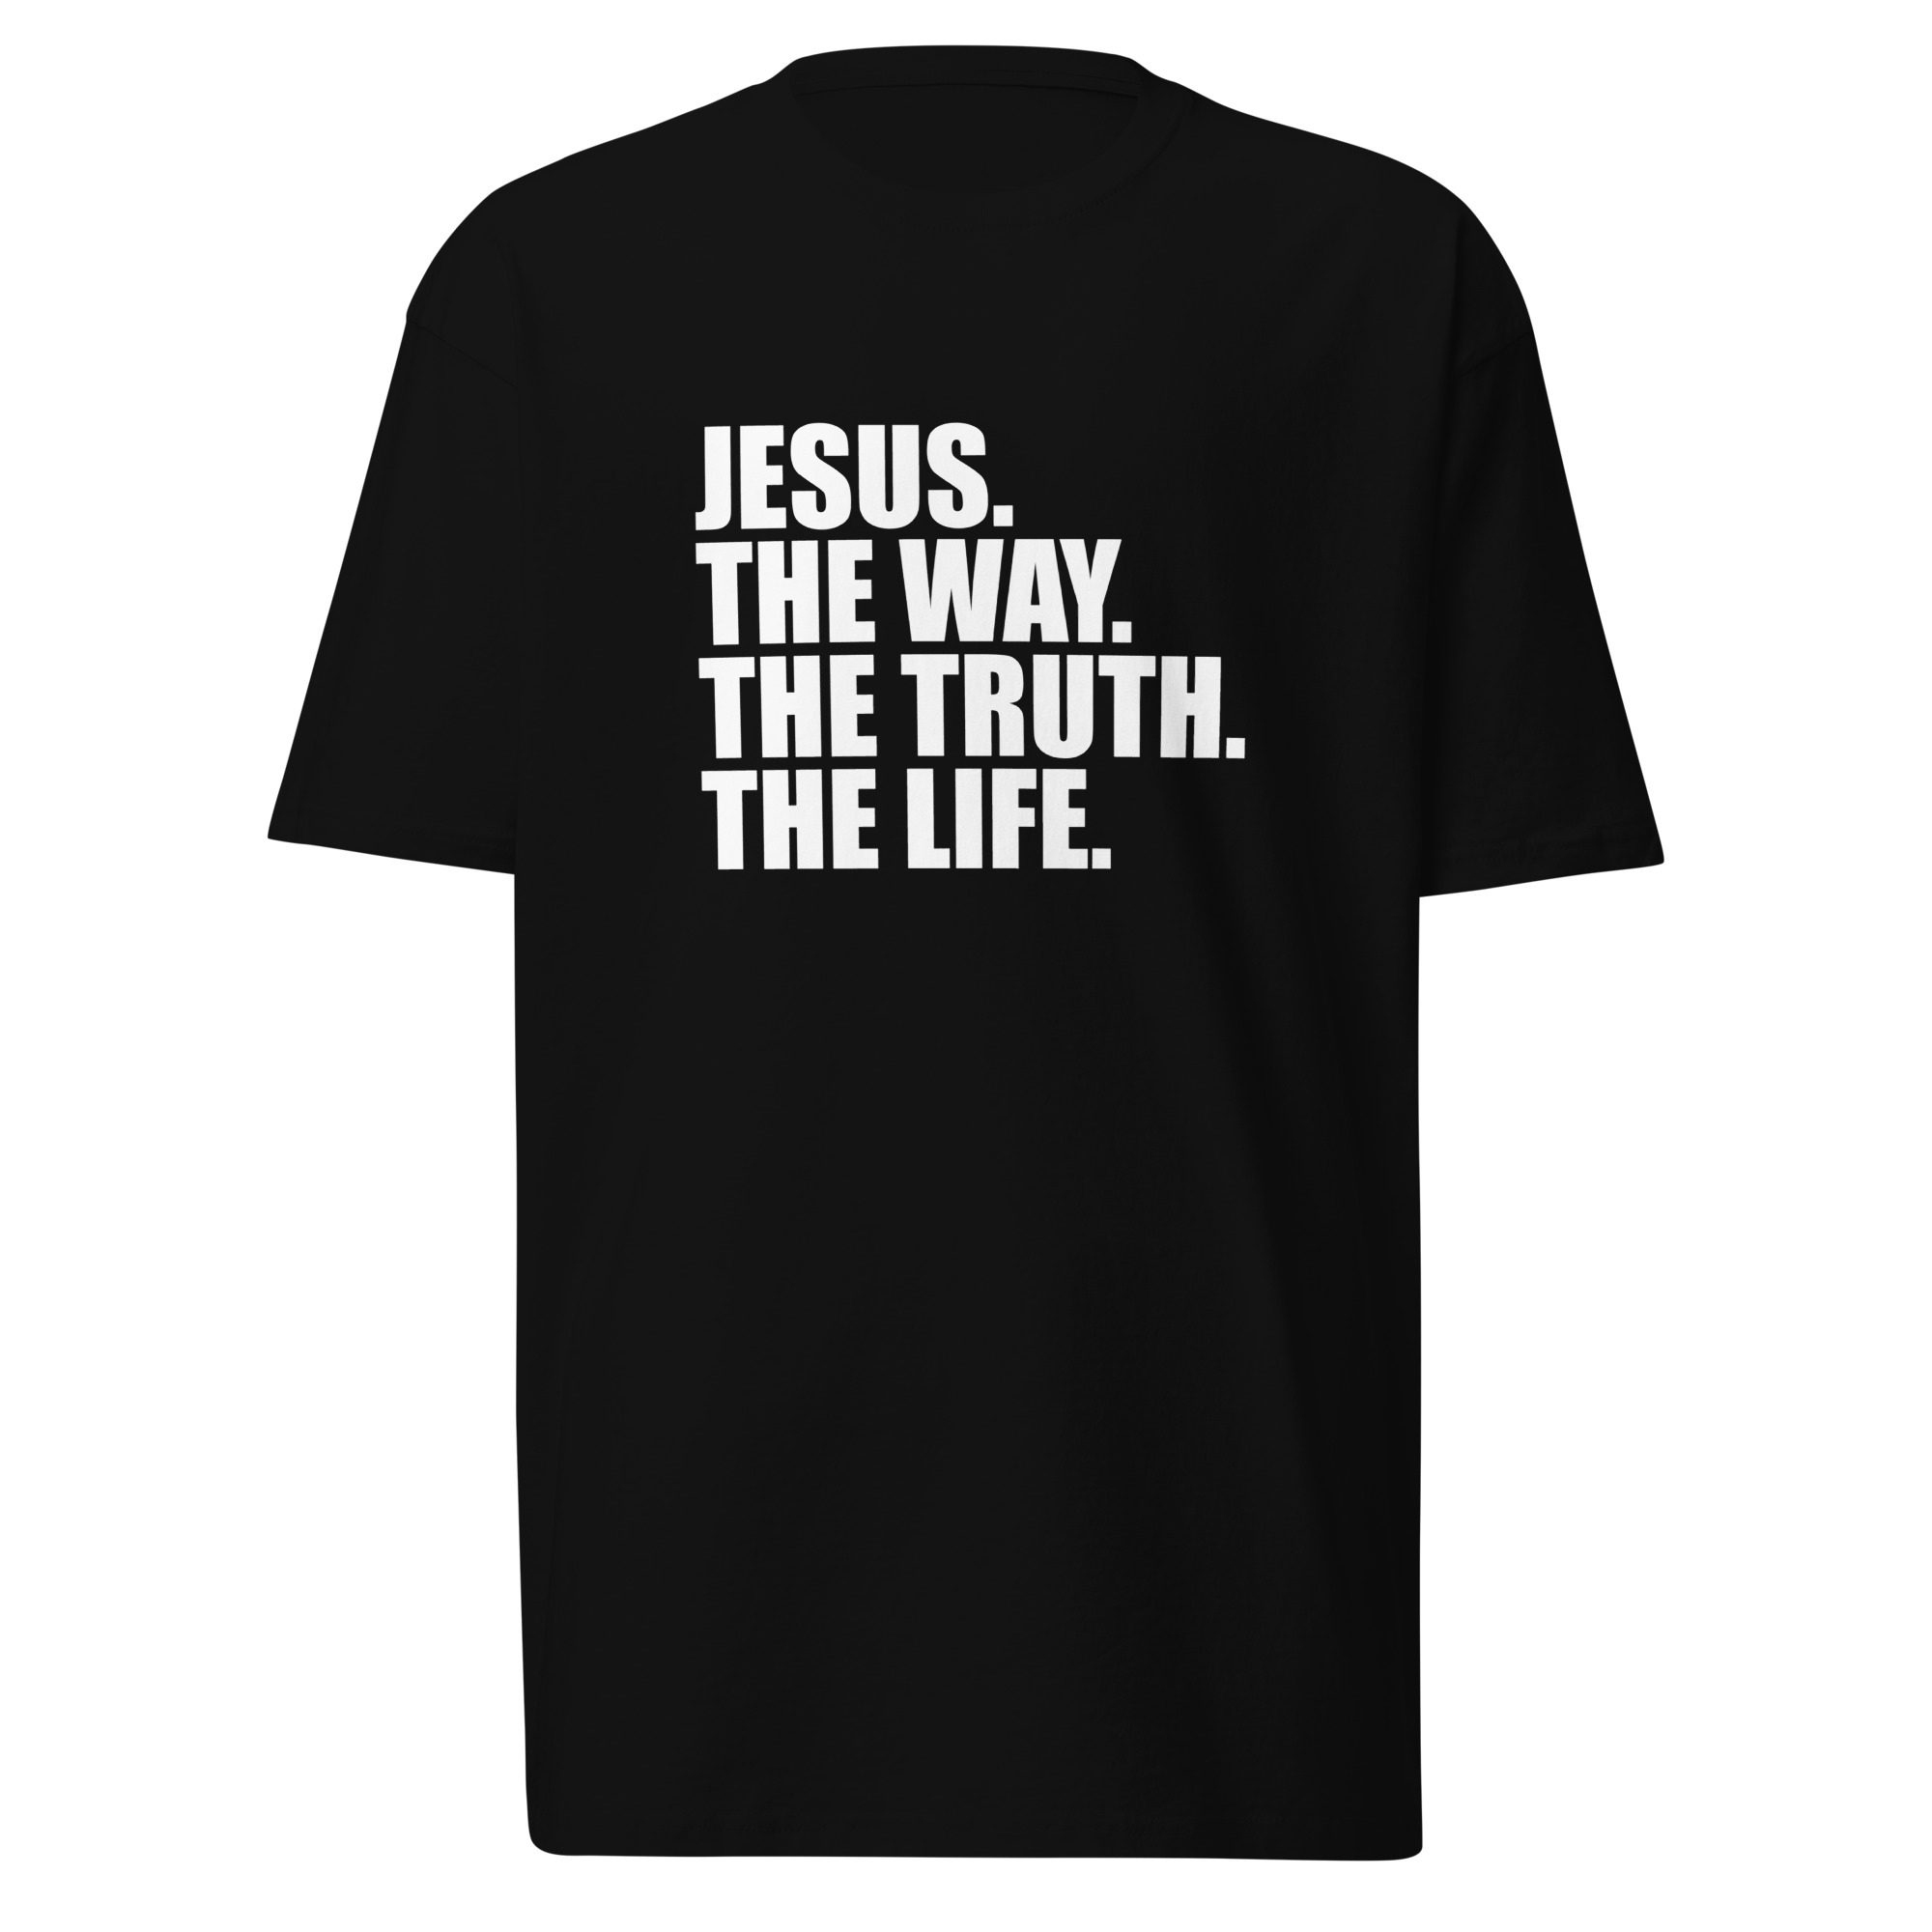 The Way. The Truth. The Life. T-Shirt - Black / L